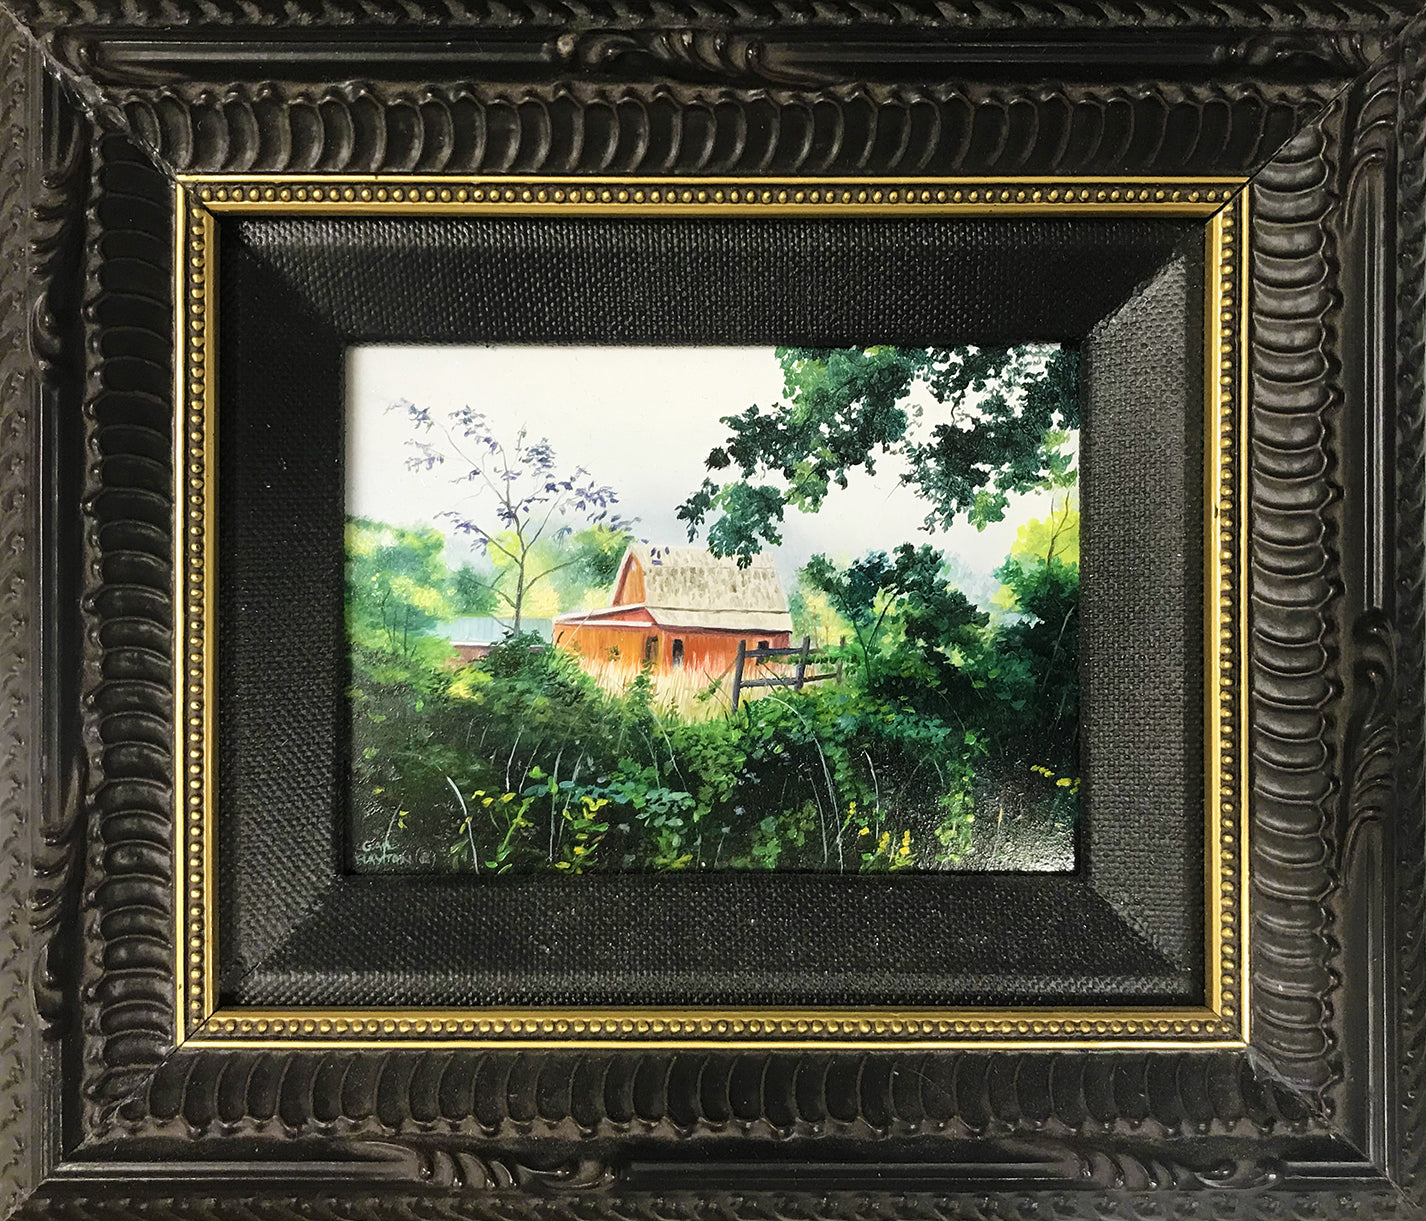 Miniature oil painting on copper by Gail Hayton. Framed with a brown liner and bronze frame with gold accents.